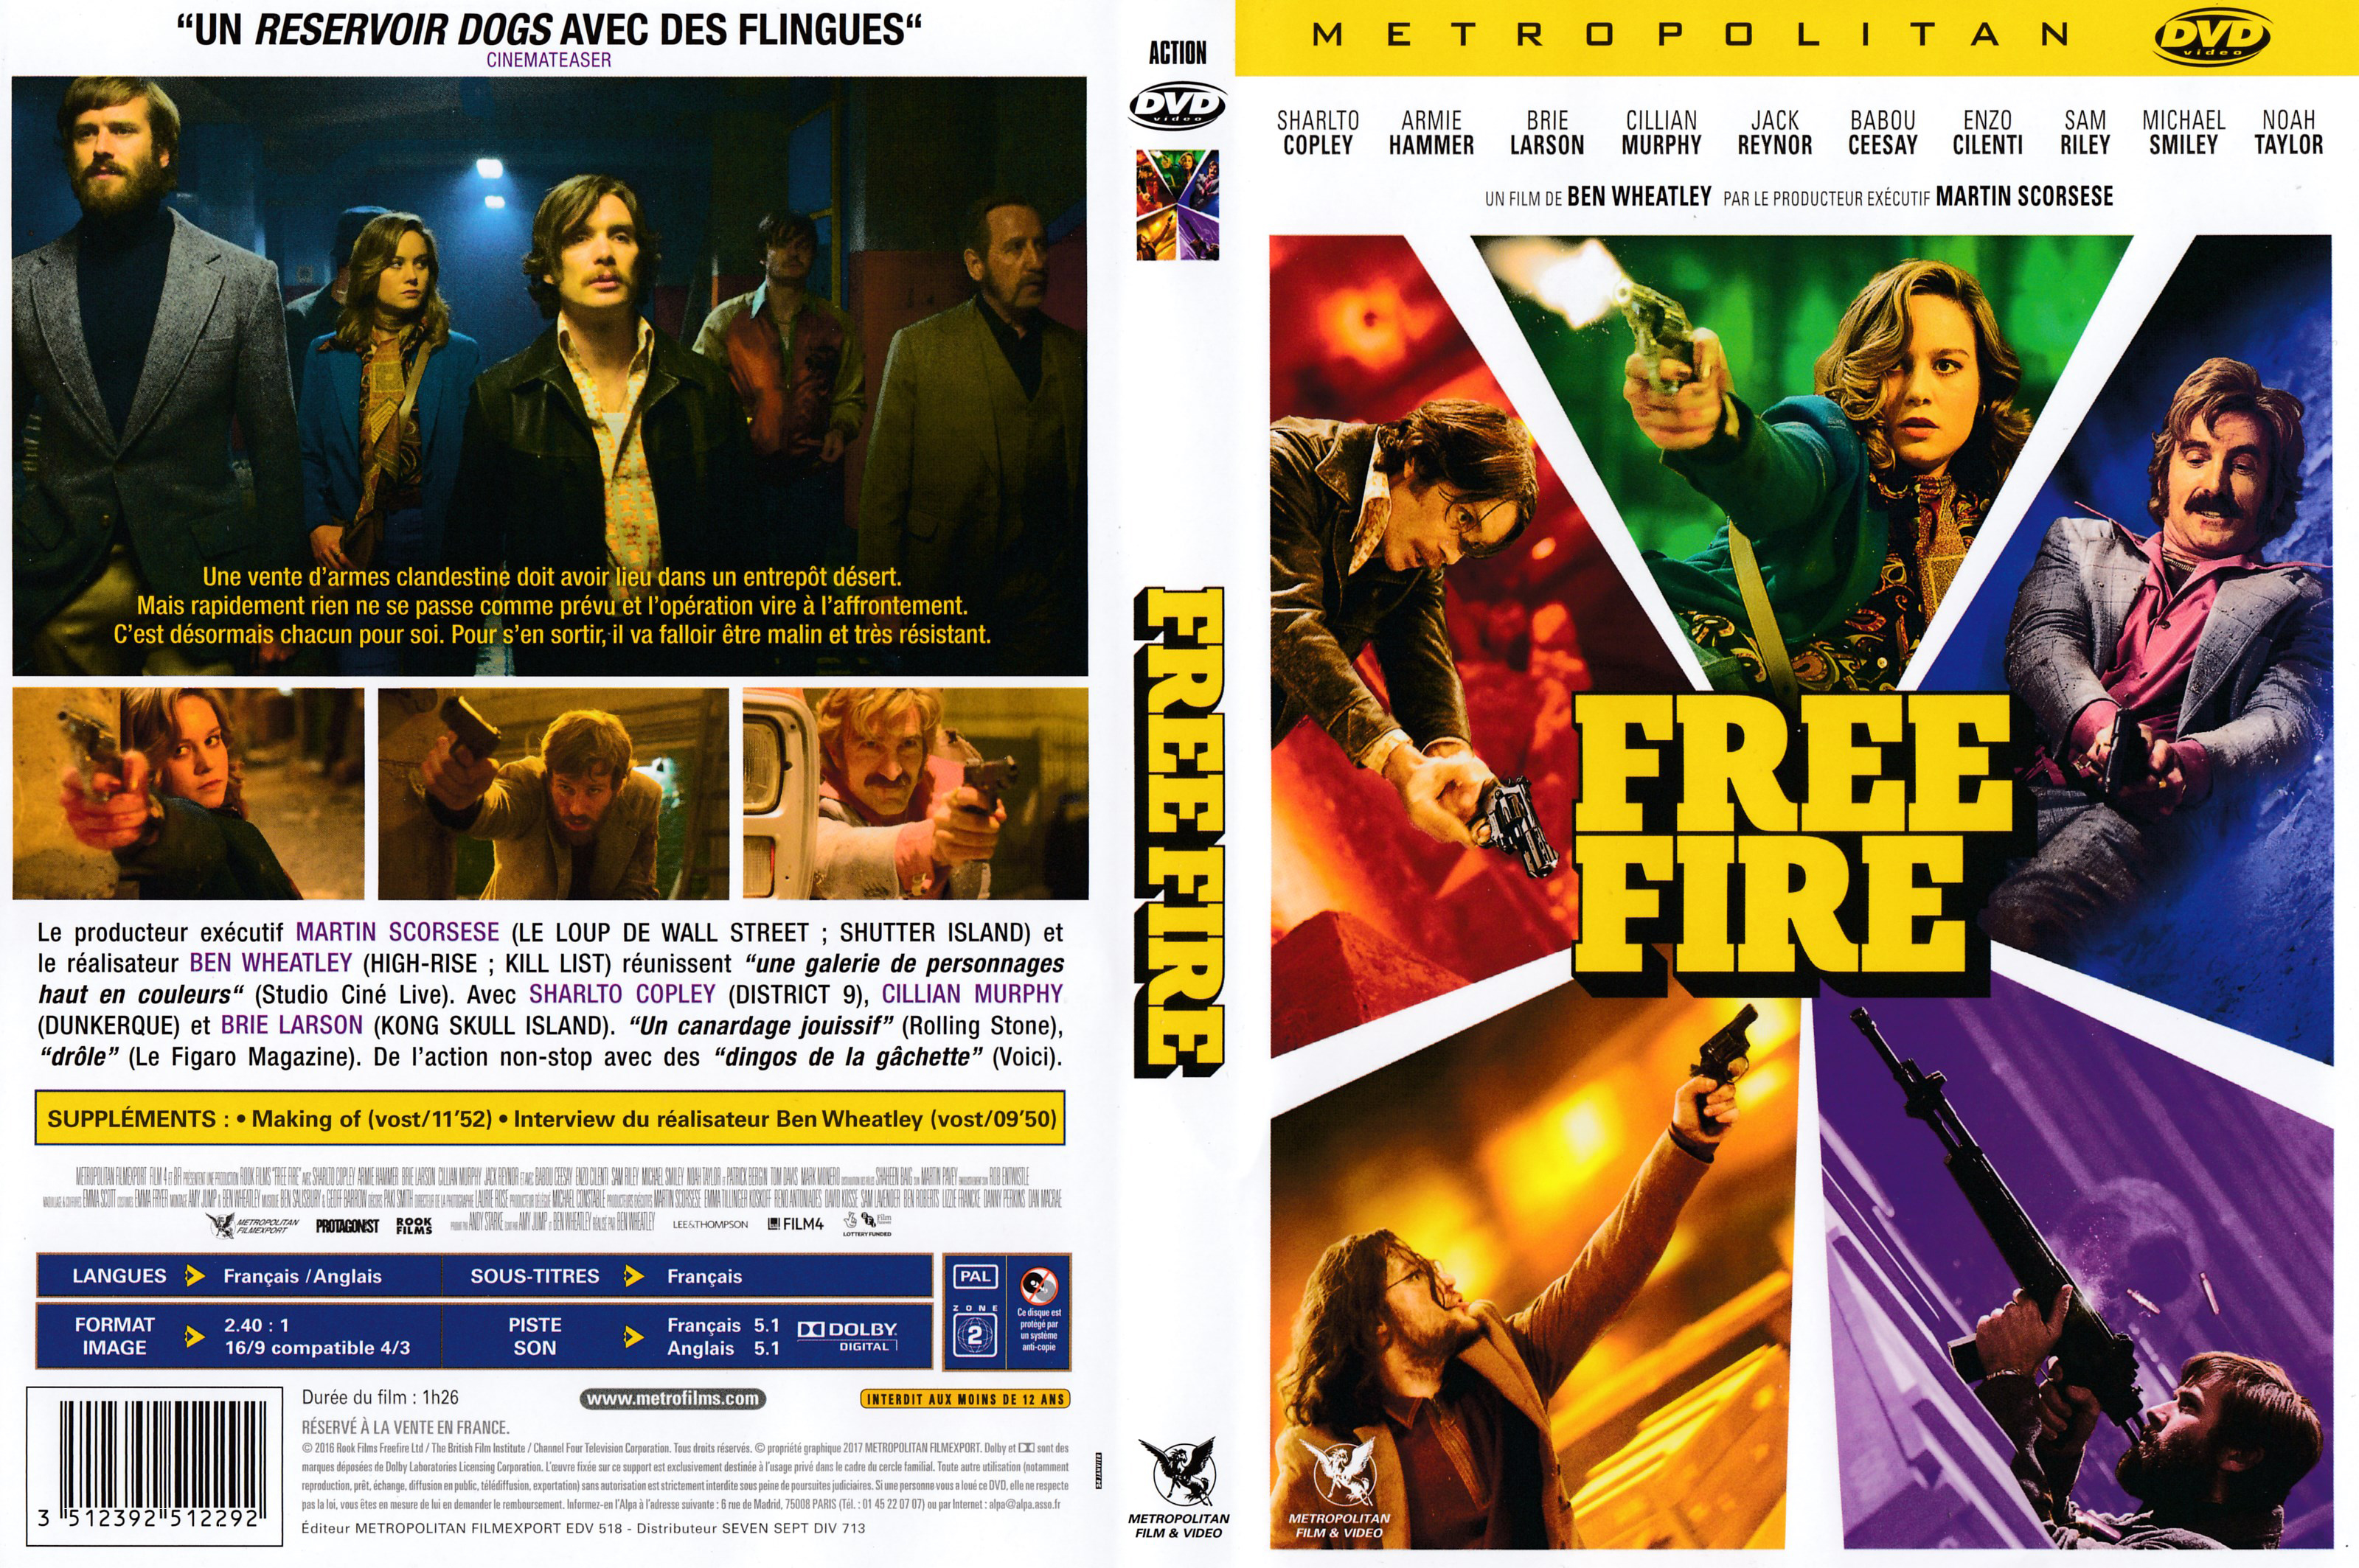 Jaquette DVD Free Fire